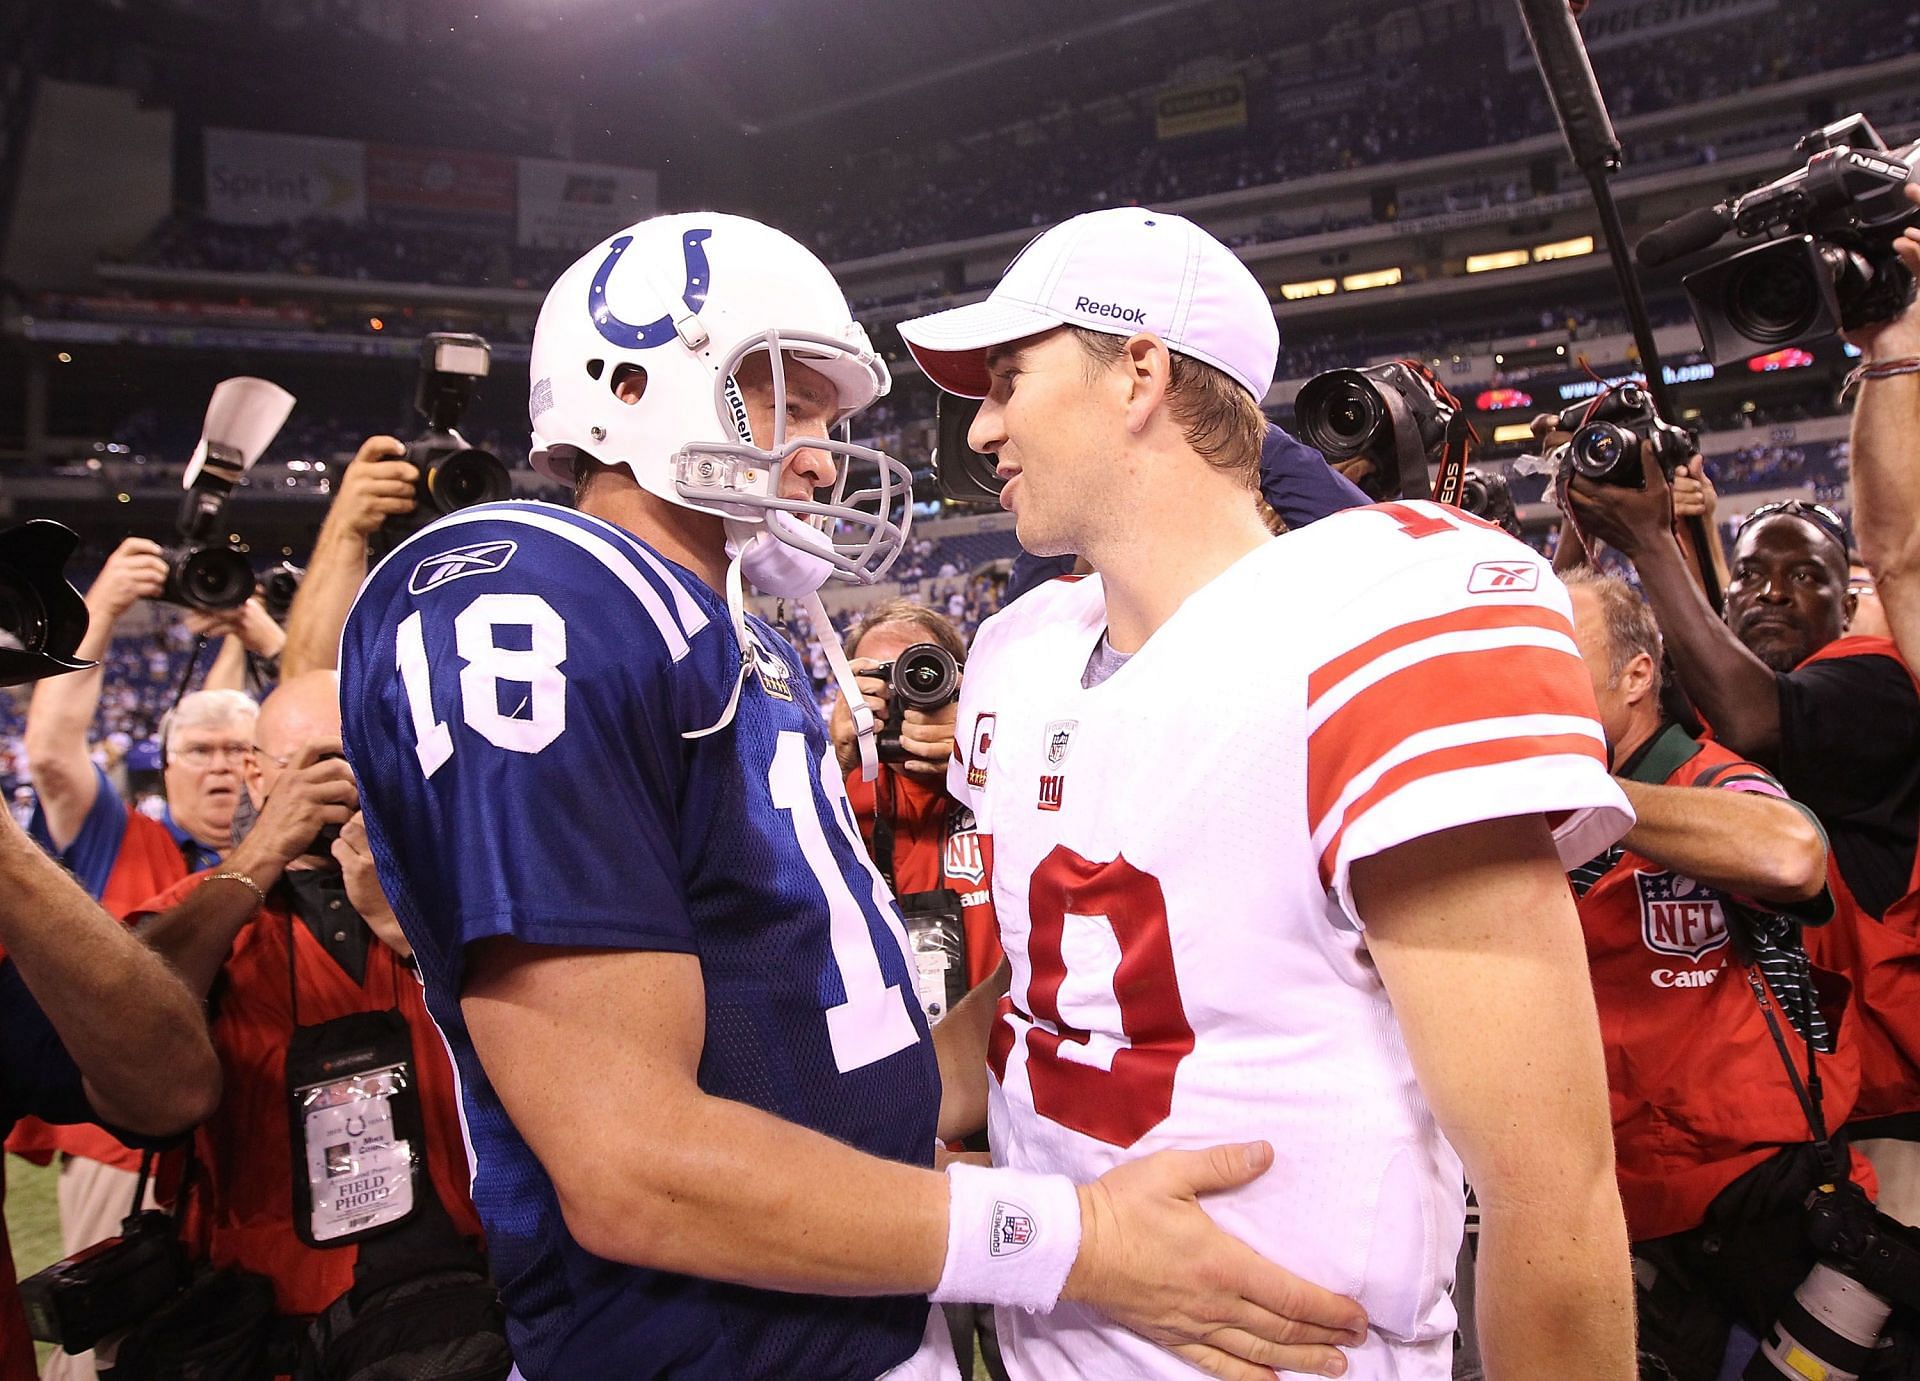 Indianapolis Colts vs. New York Giants (image credit - Bleacher Report)